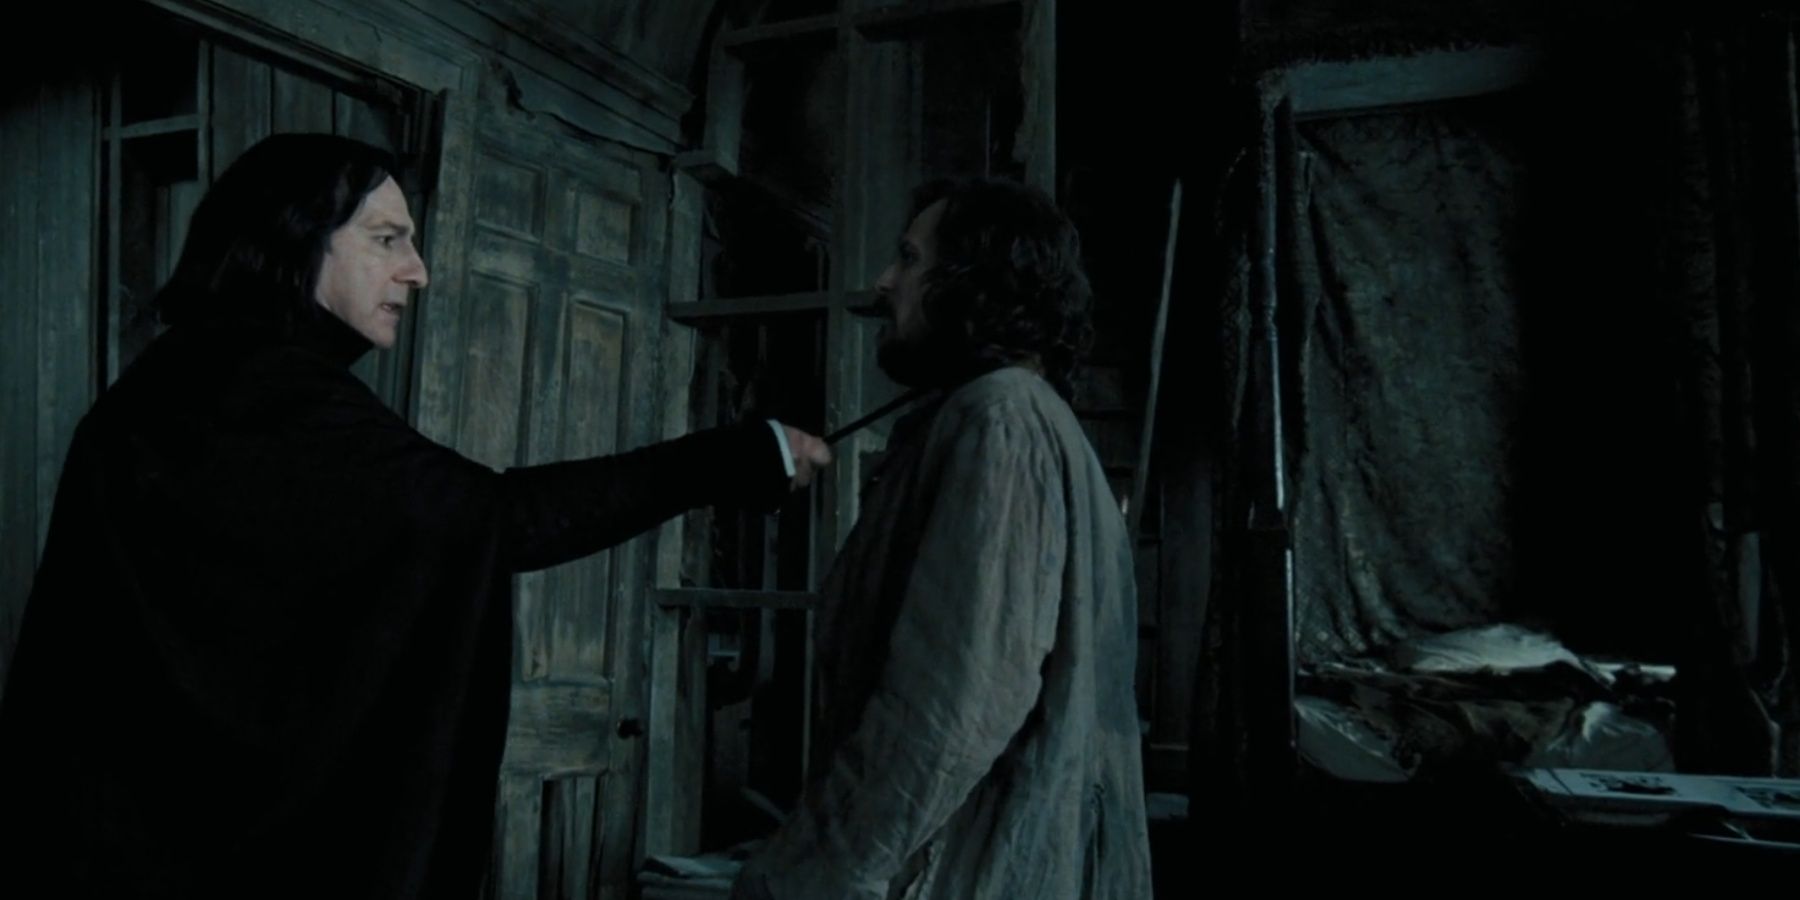 Severus Snape confronts Sirius Black in Harry Potter and the Prisoner of Azkaban.